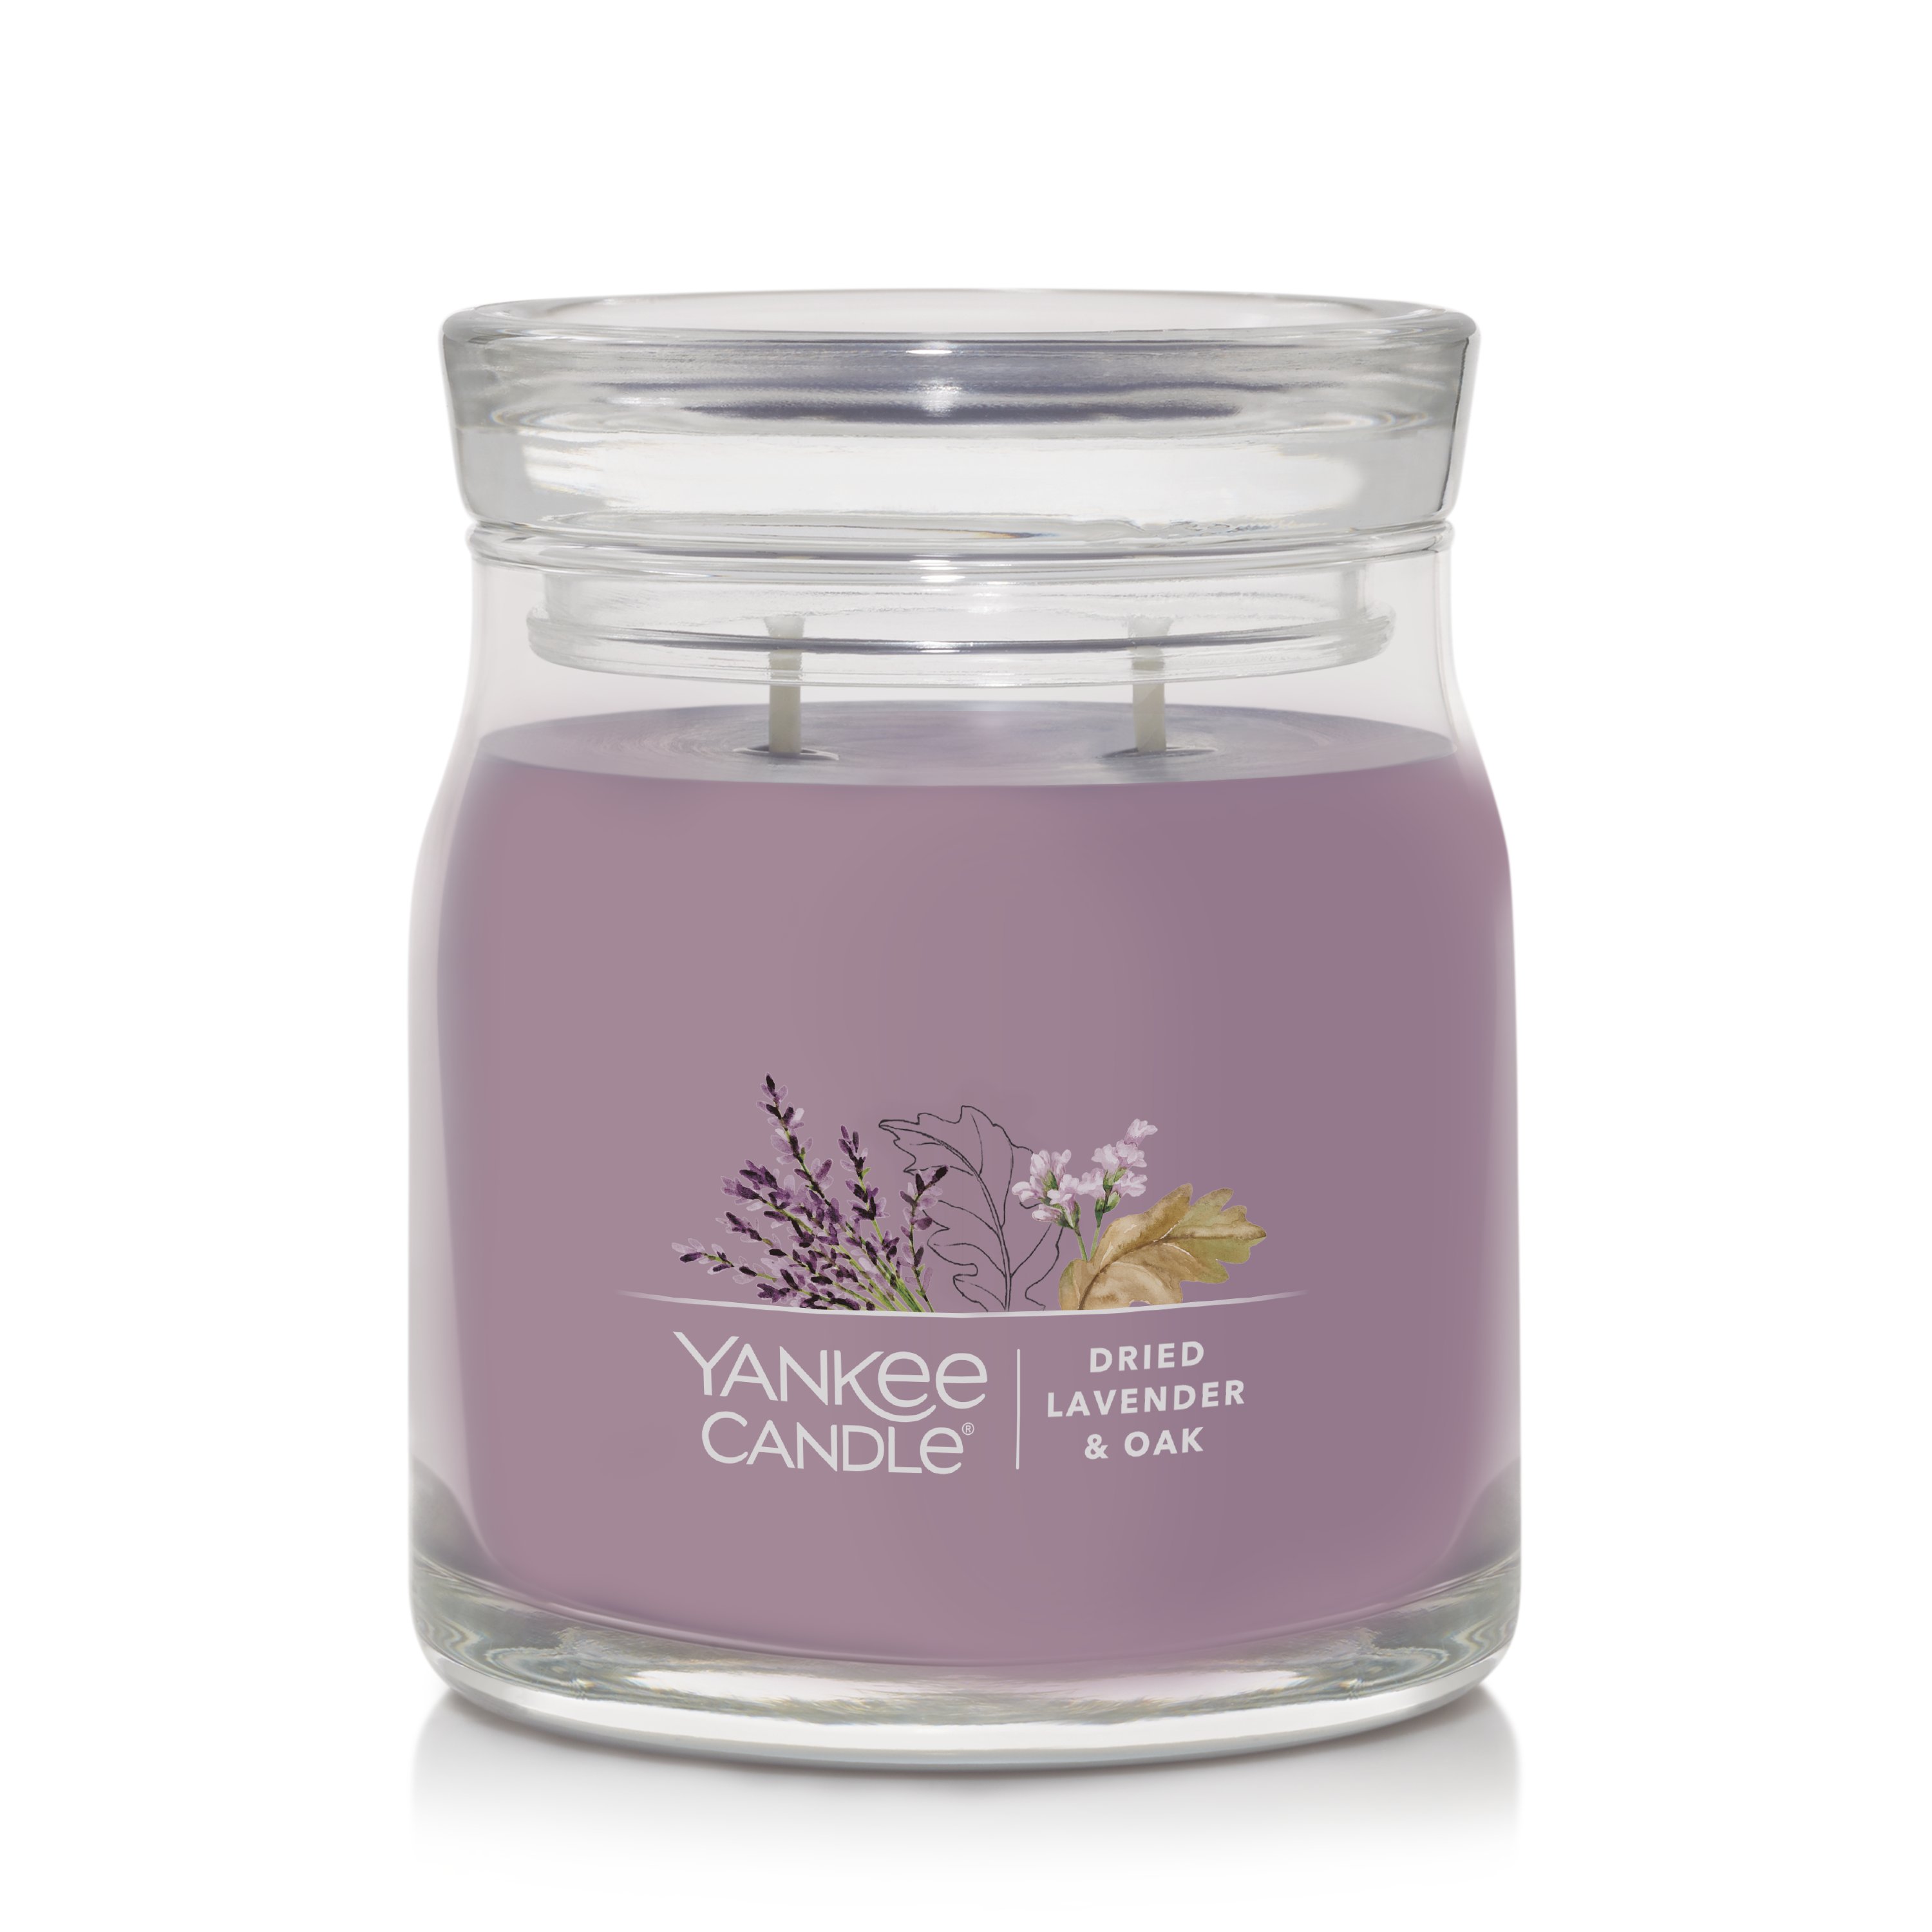 YANKEE CANDLE Large 22 oz Glass Jar Candle LAVENDER FLOWERS Floral PURPLE  New